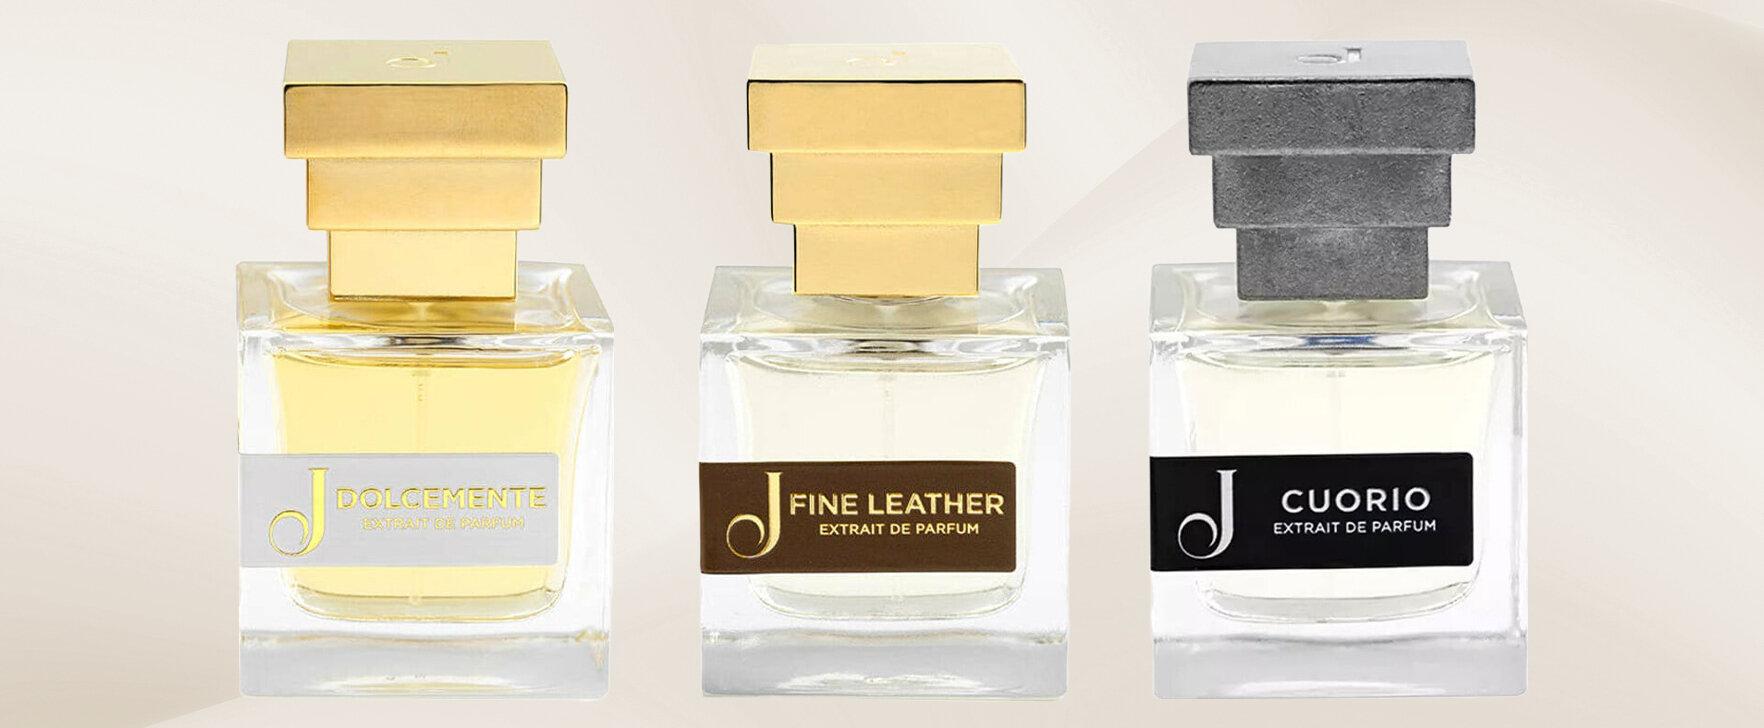 Dolcemente, Fine Leather and Cuorio: The New Extraits de Parfum From Jupilò